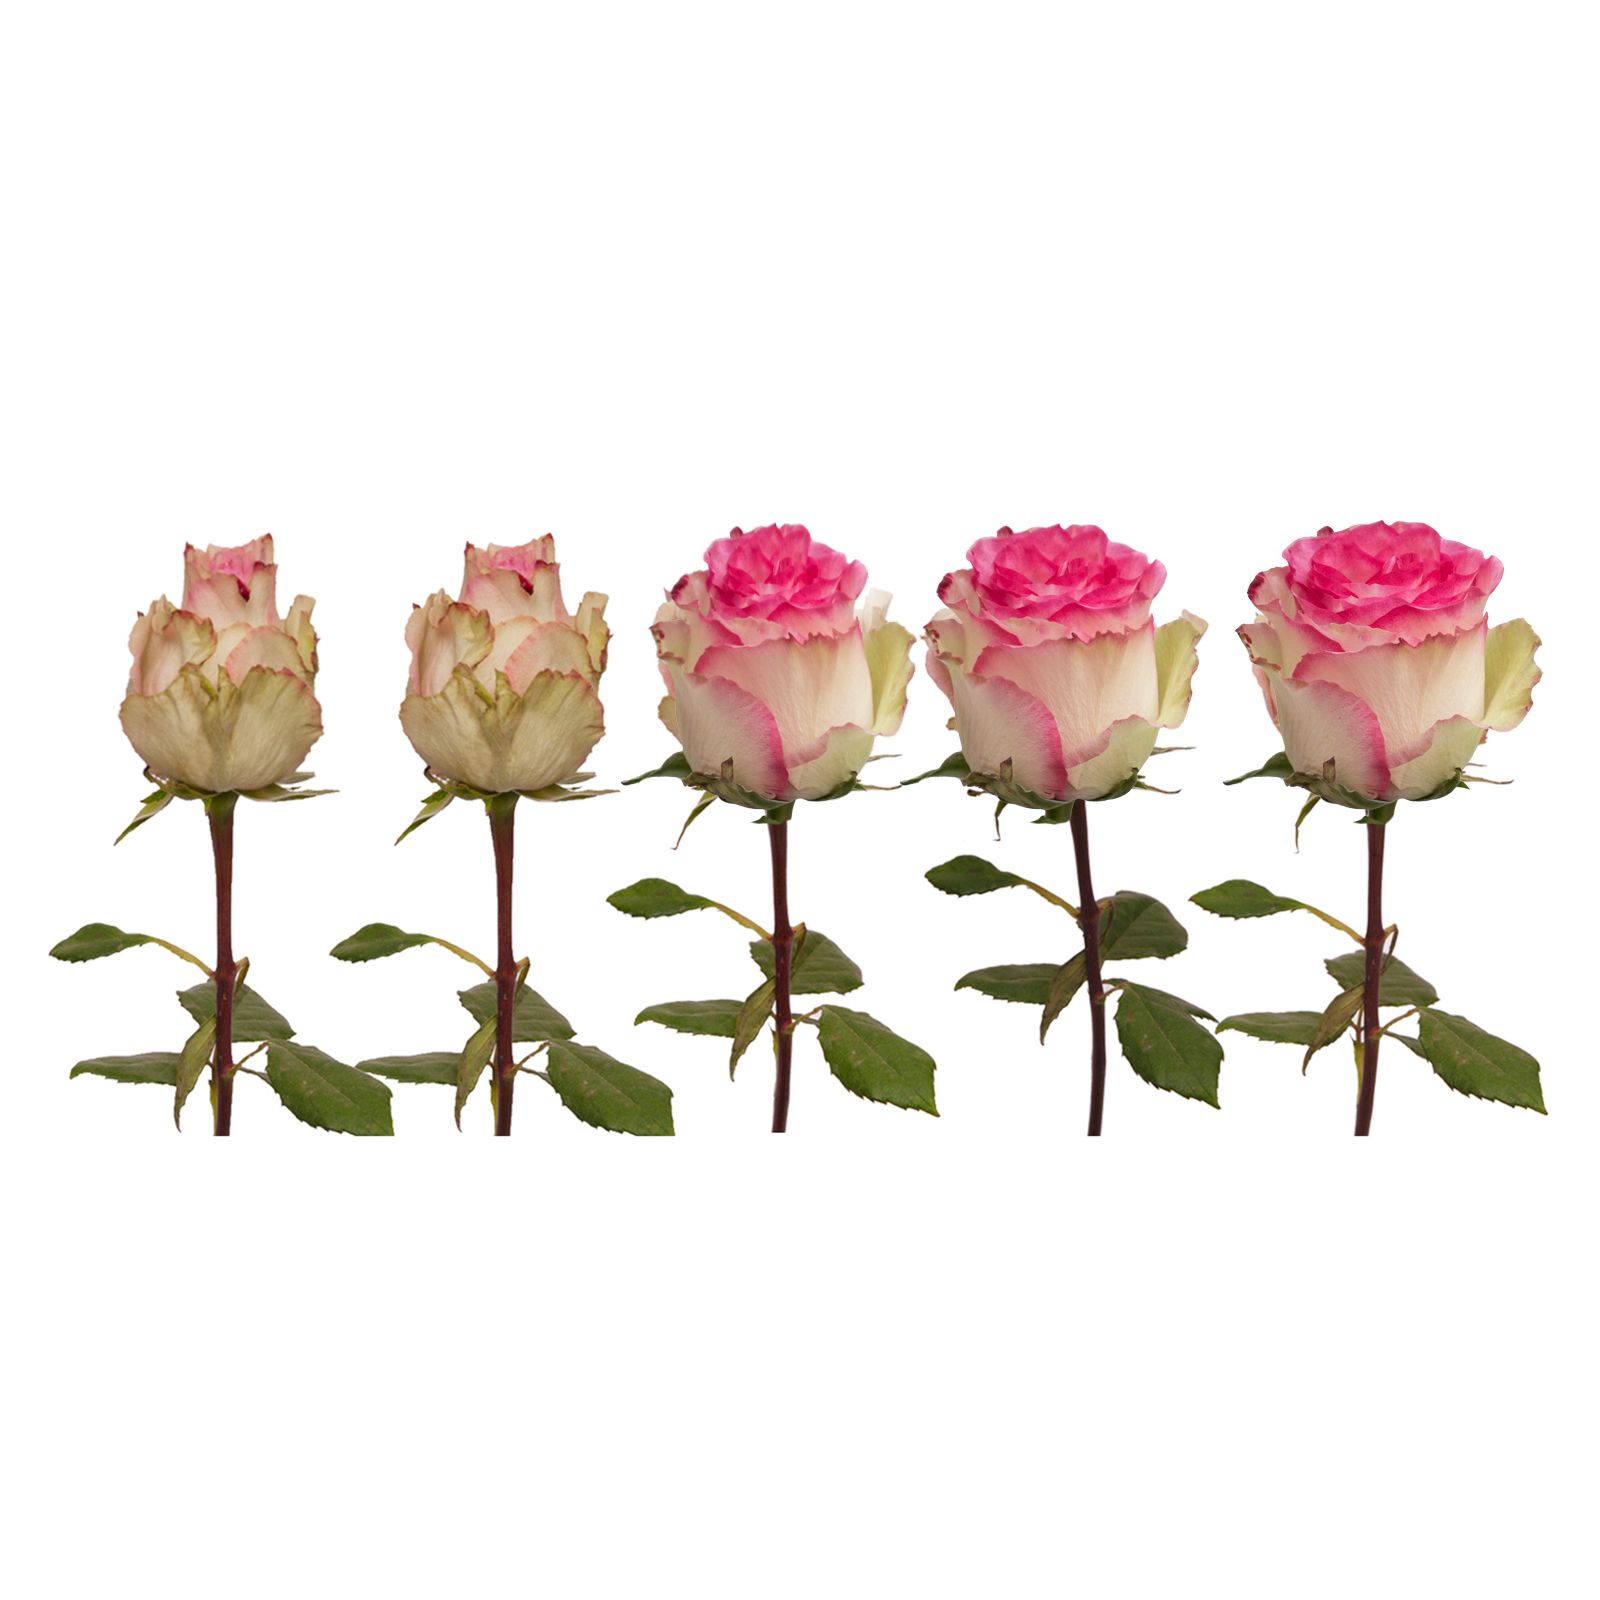 White/Pink Bicolor Roses, 125 Stems